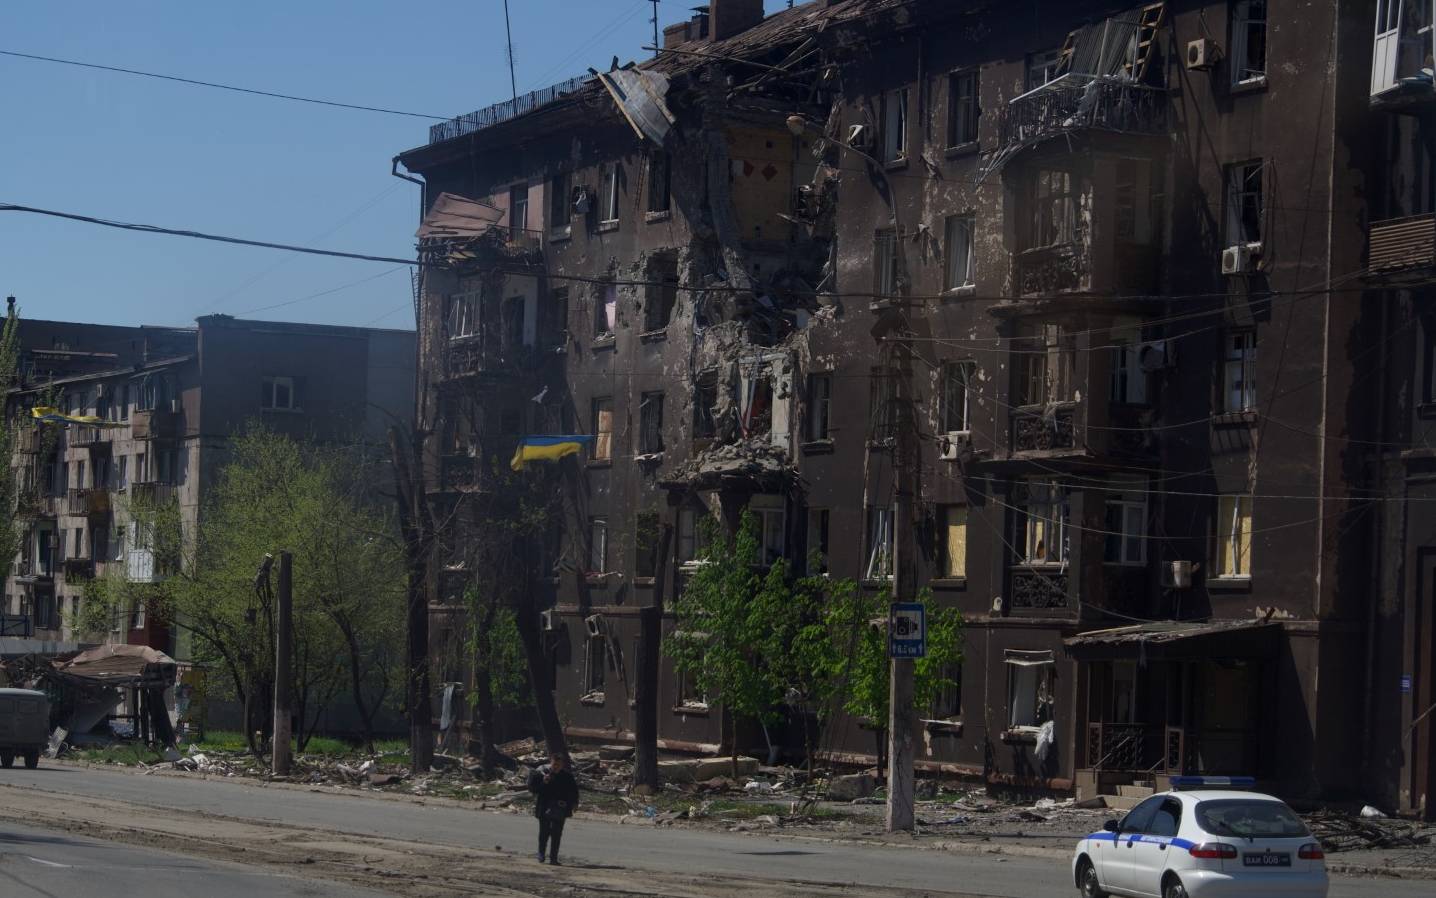 A person walks along a street past a charred residential building in the city of Mariupol on April 29, 2022, amid the ongoing Russian military action in Ukraine. (Photo by Andrey BORODULIN / AFP)